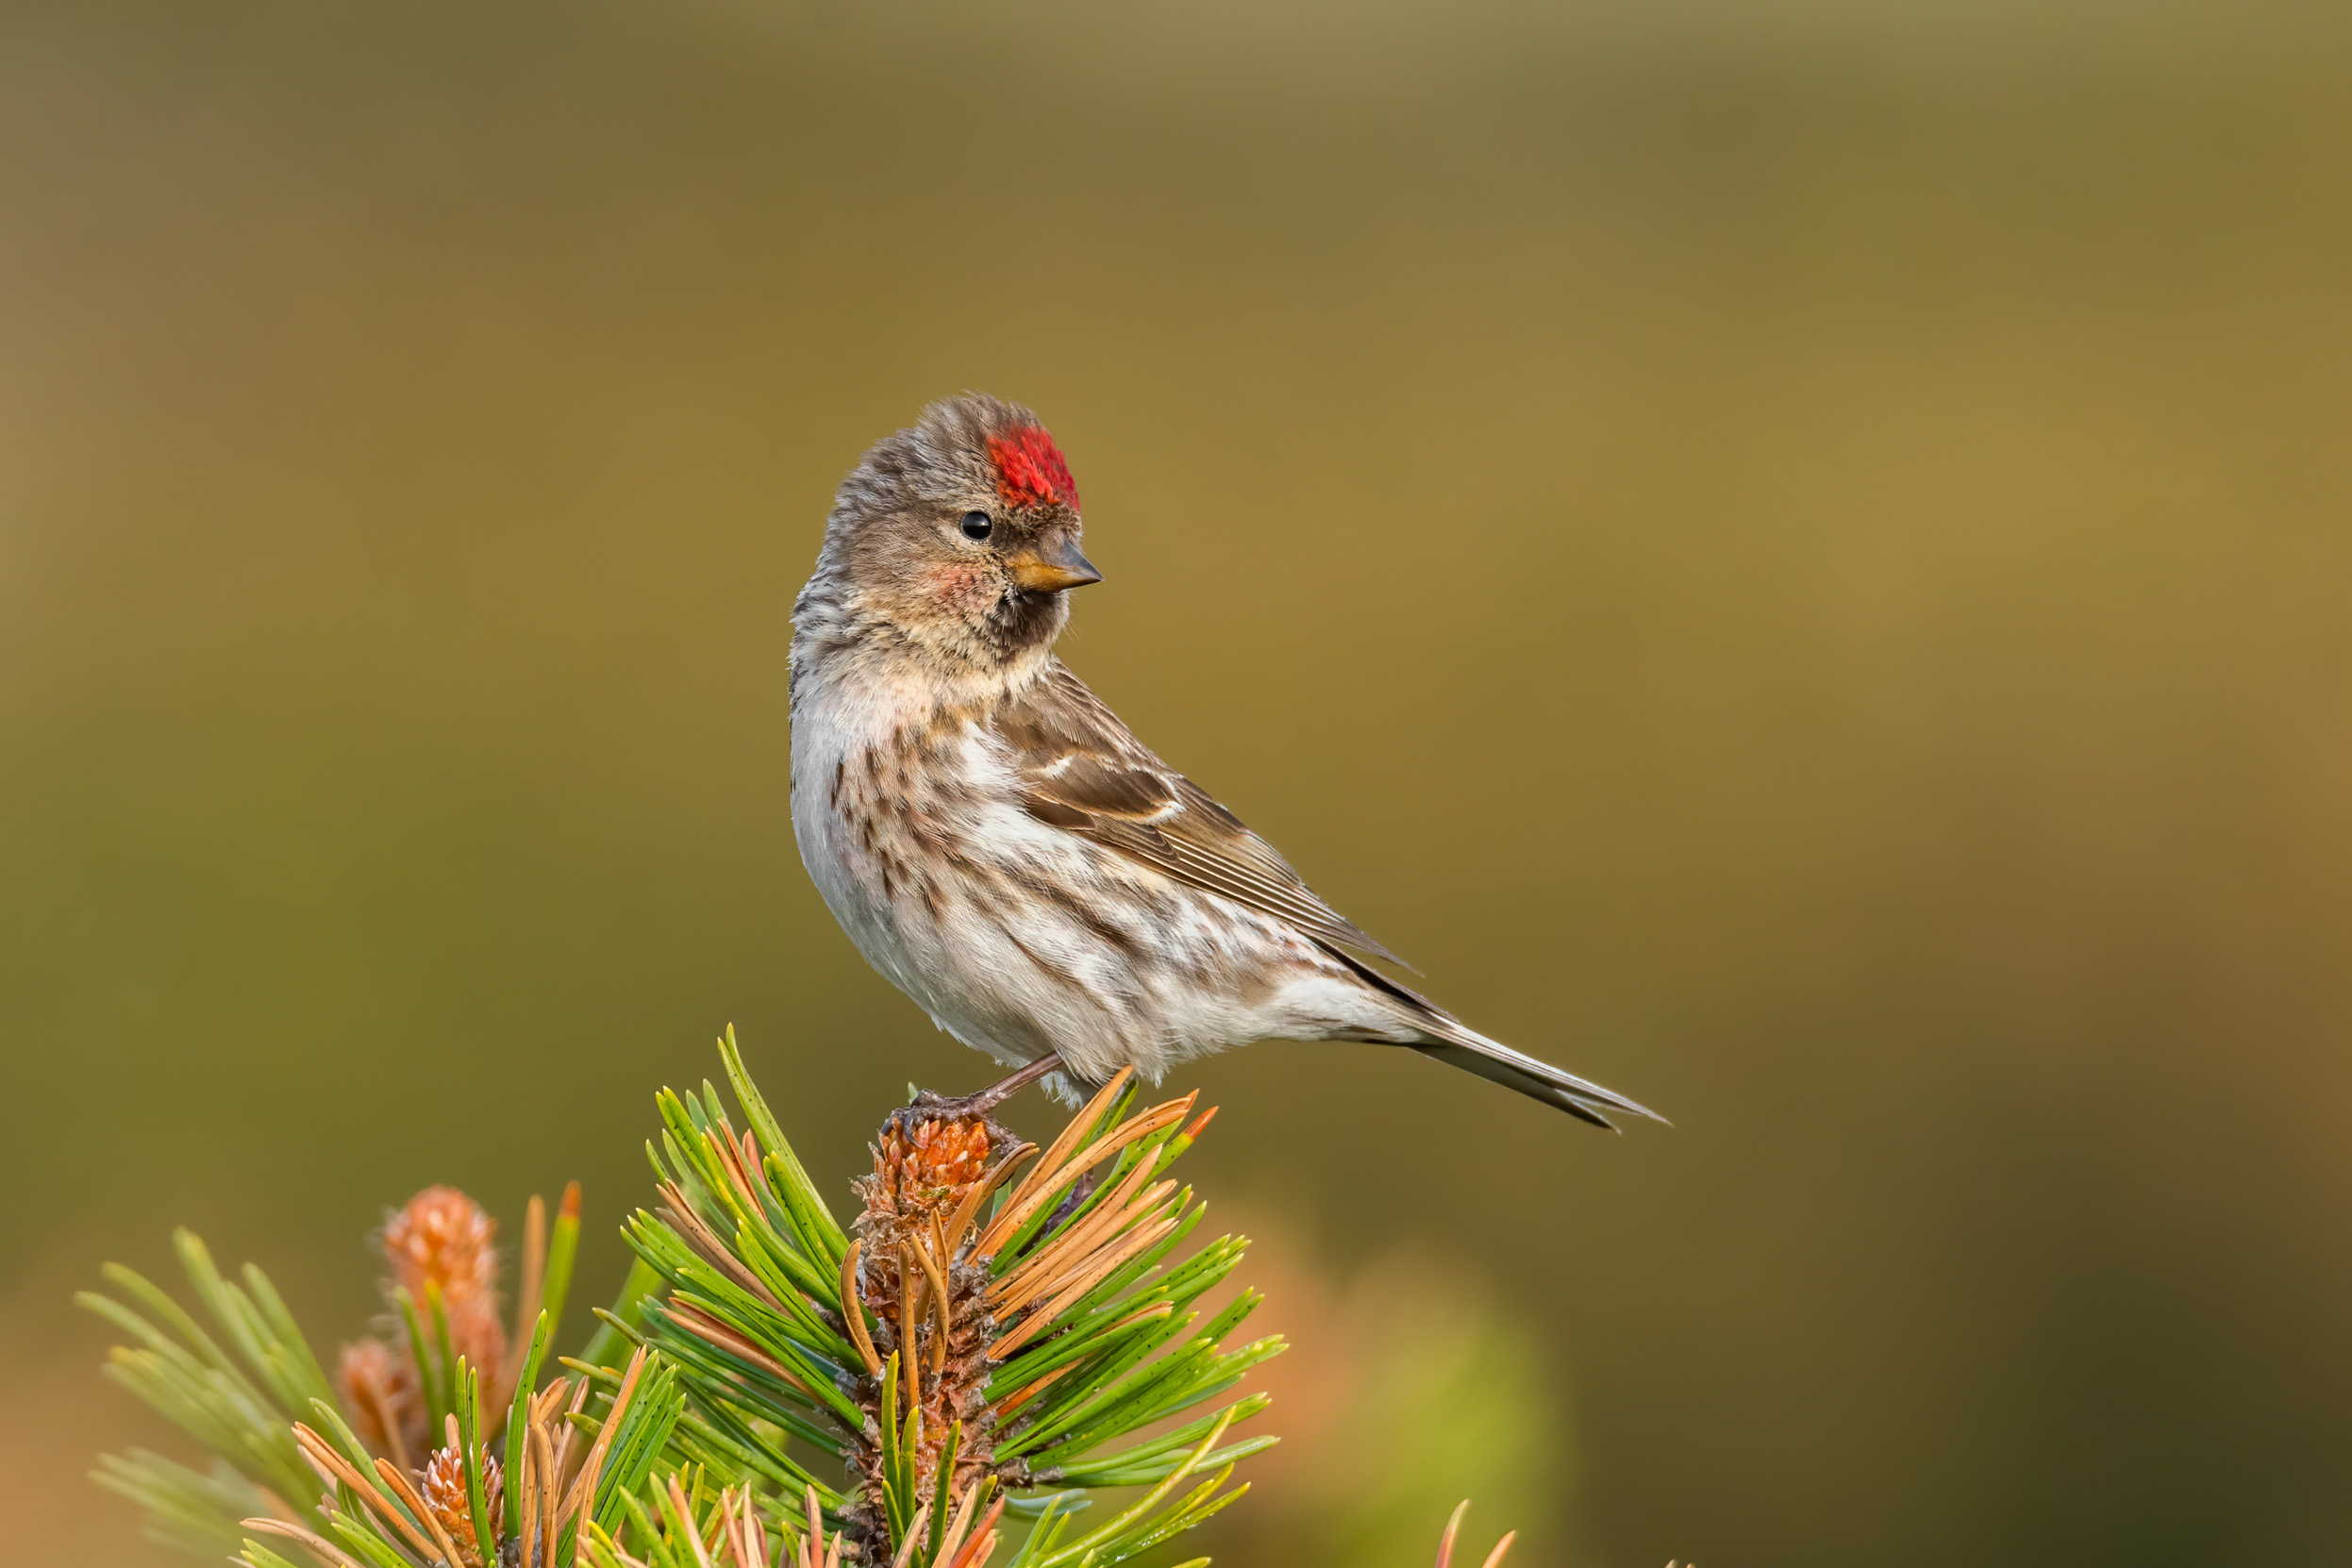 A Lesser Redpoll stood at the very top of a tree.